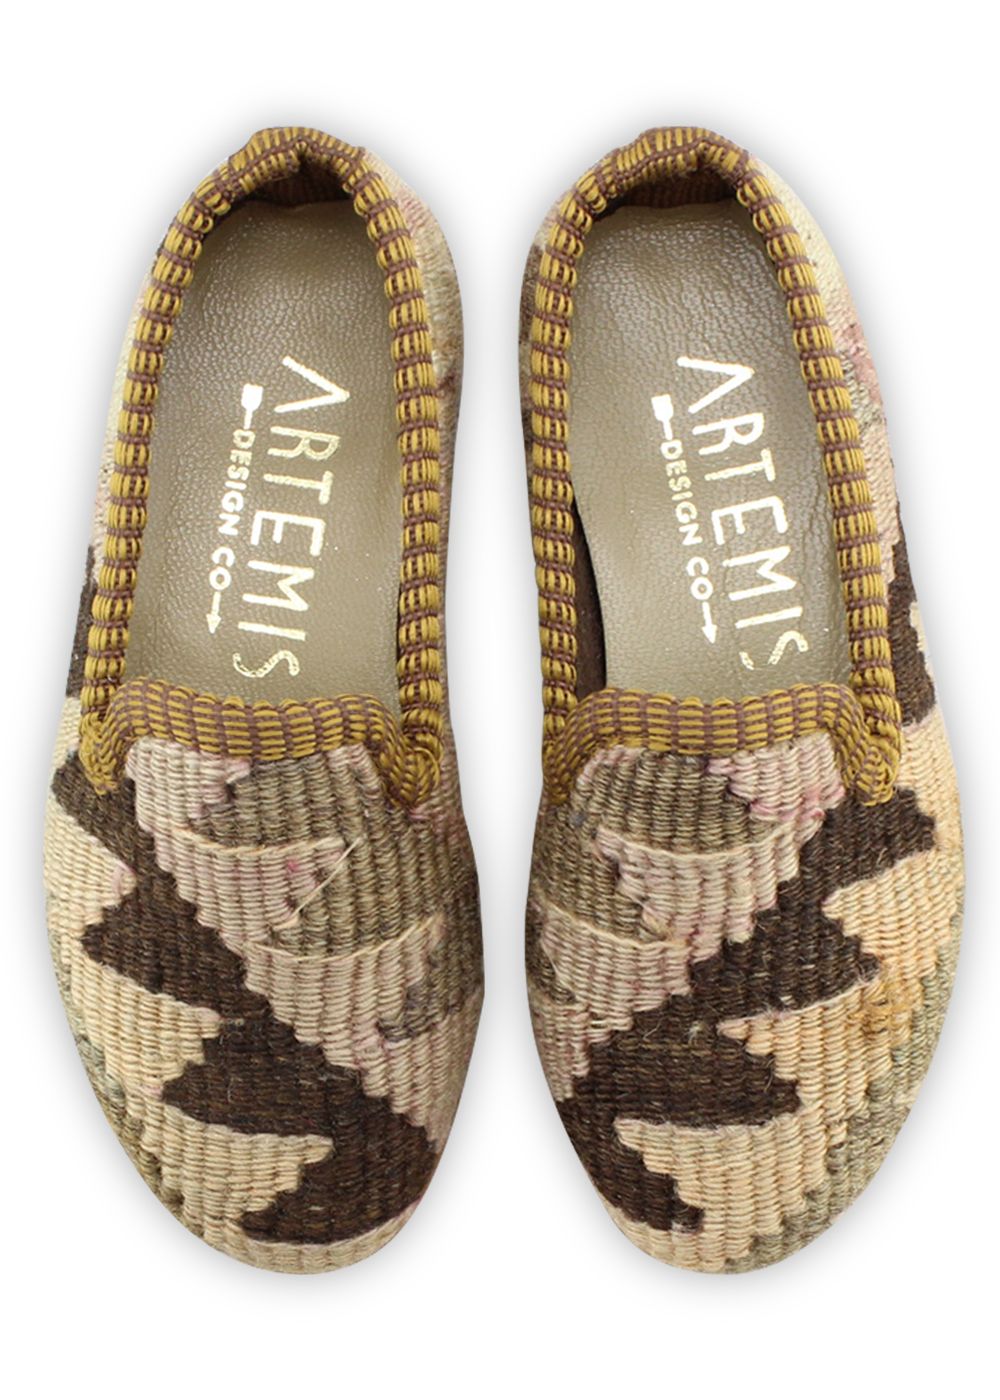 Archived Children's Shoes - Children's Kilim Loafers - Size 24